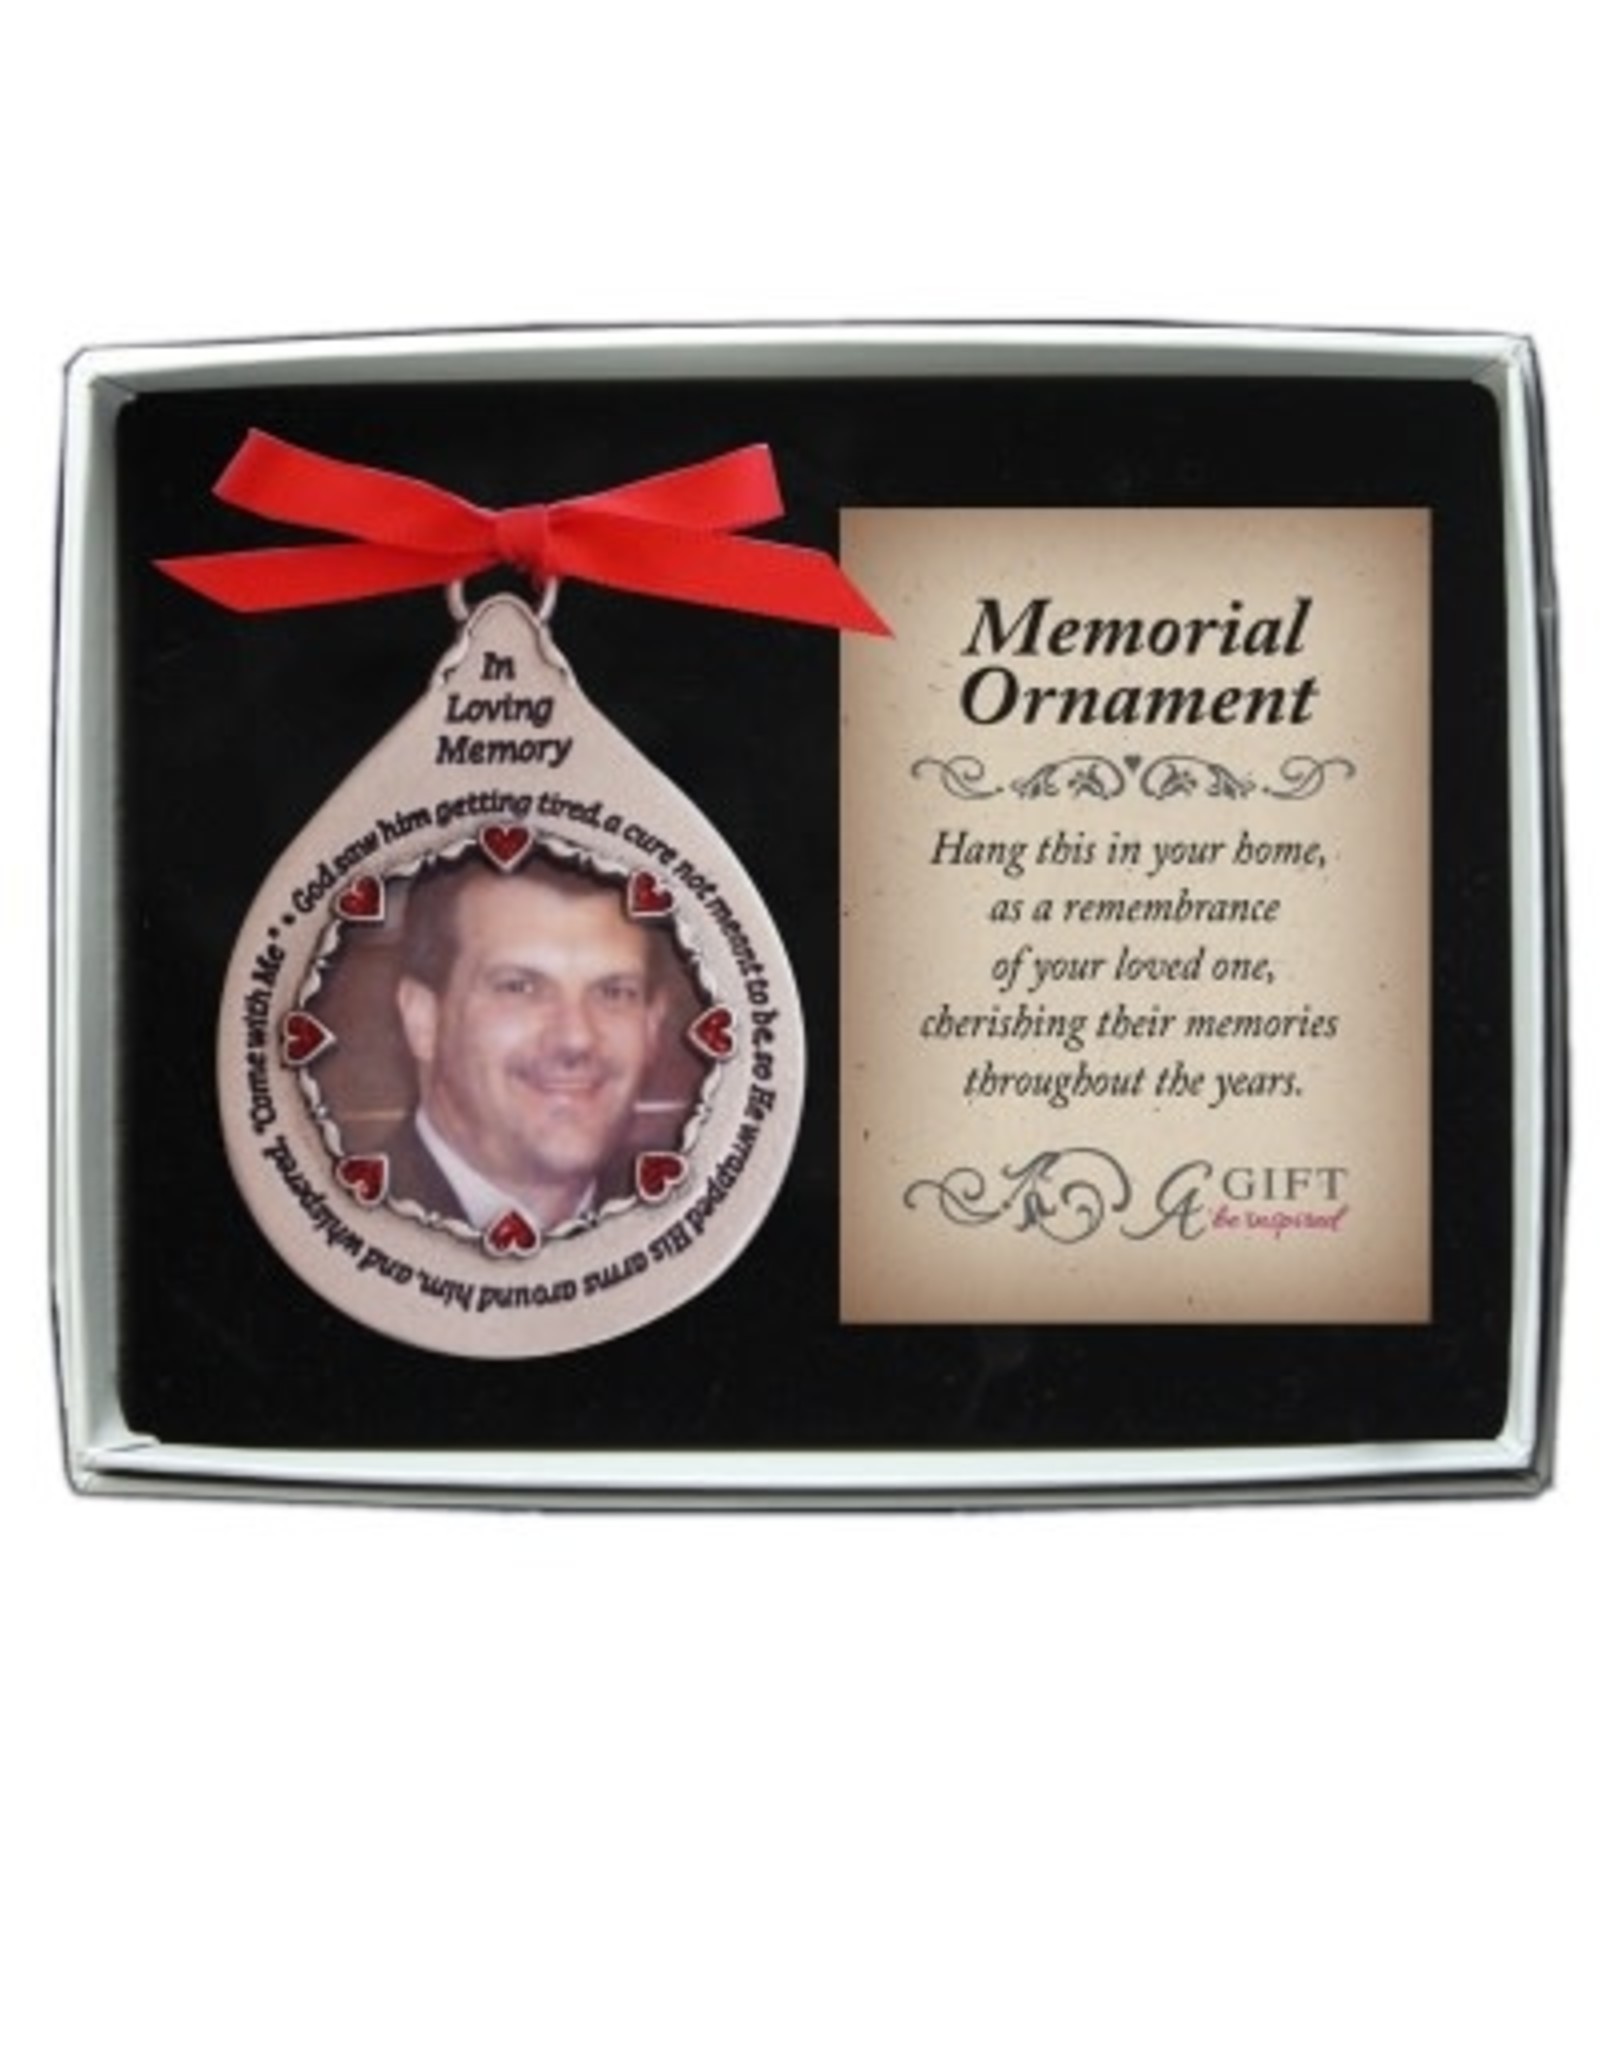 Cathedral Art "God Saw His Tear" Memorial Ornament Frame